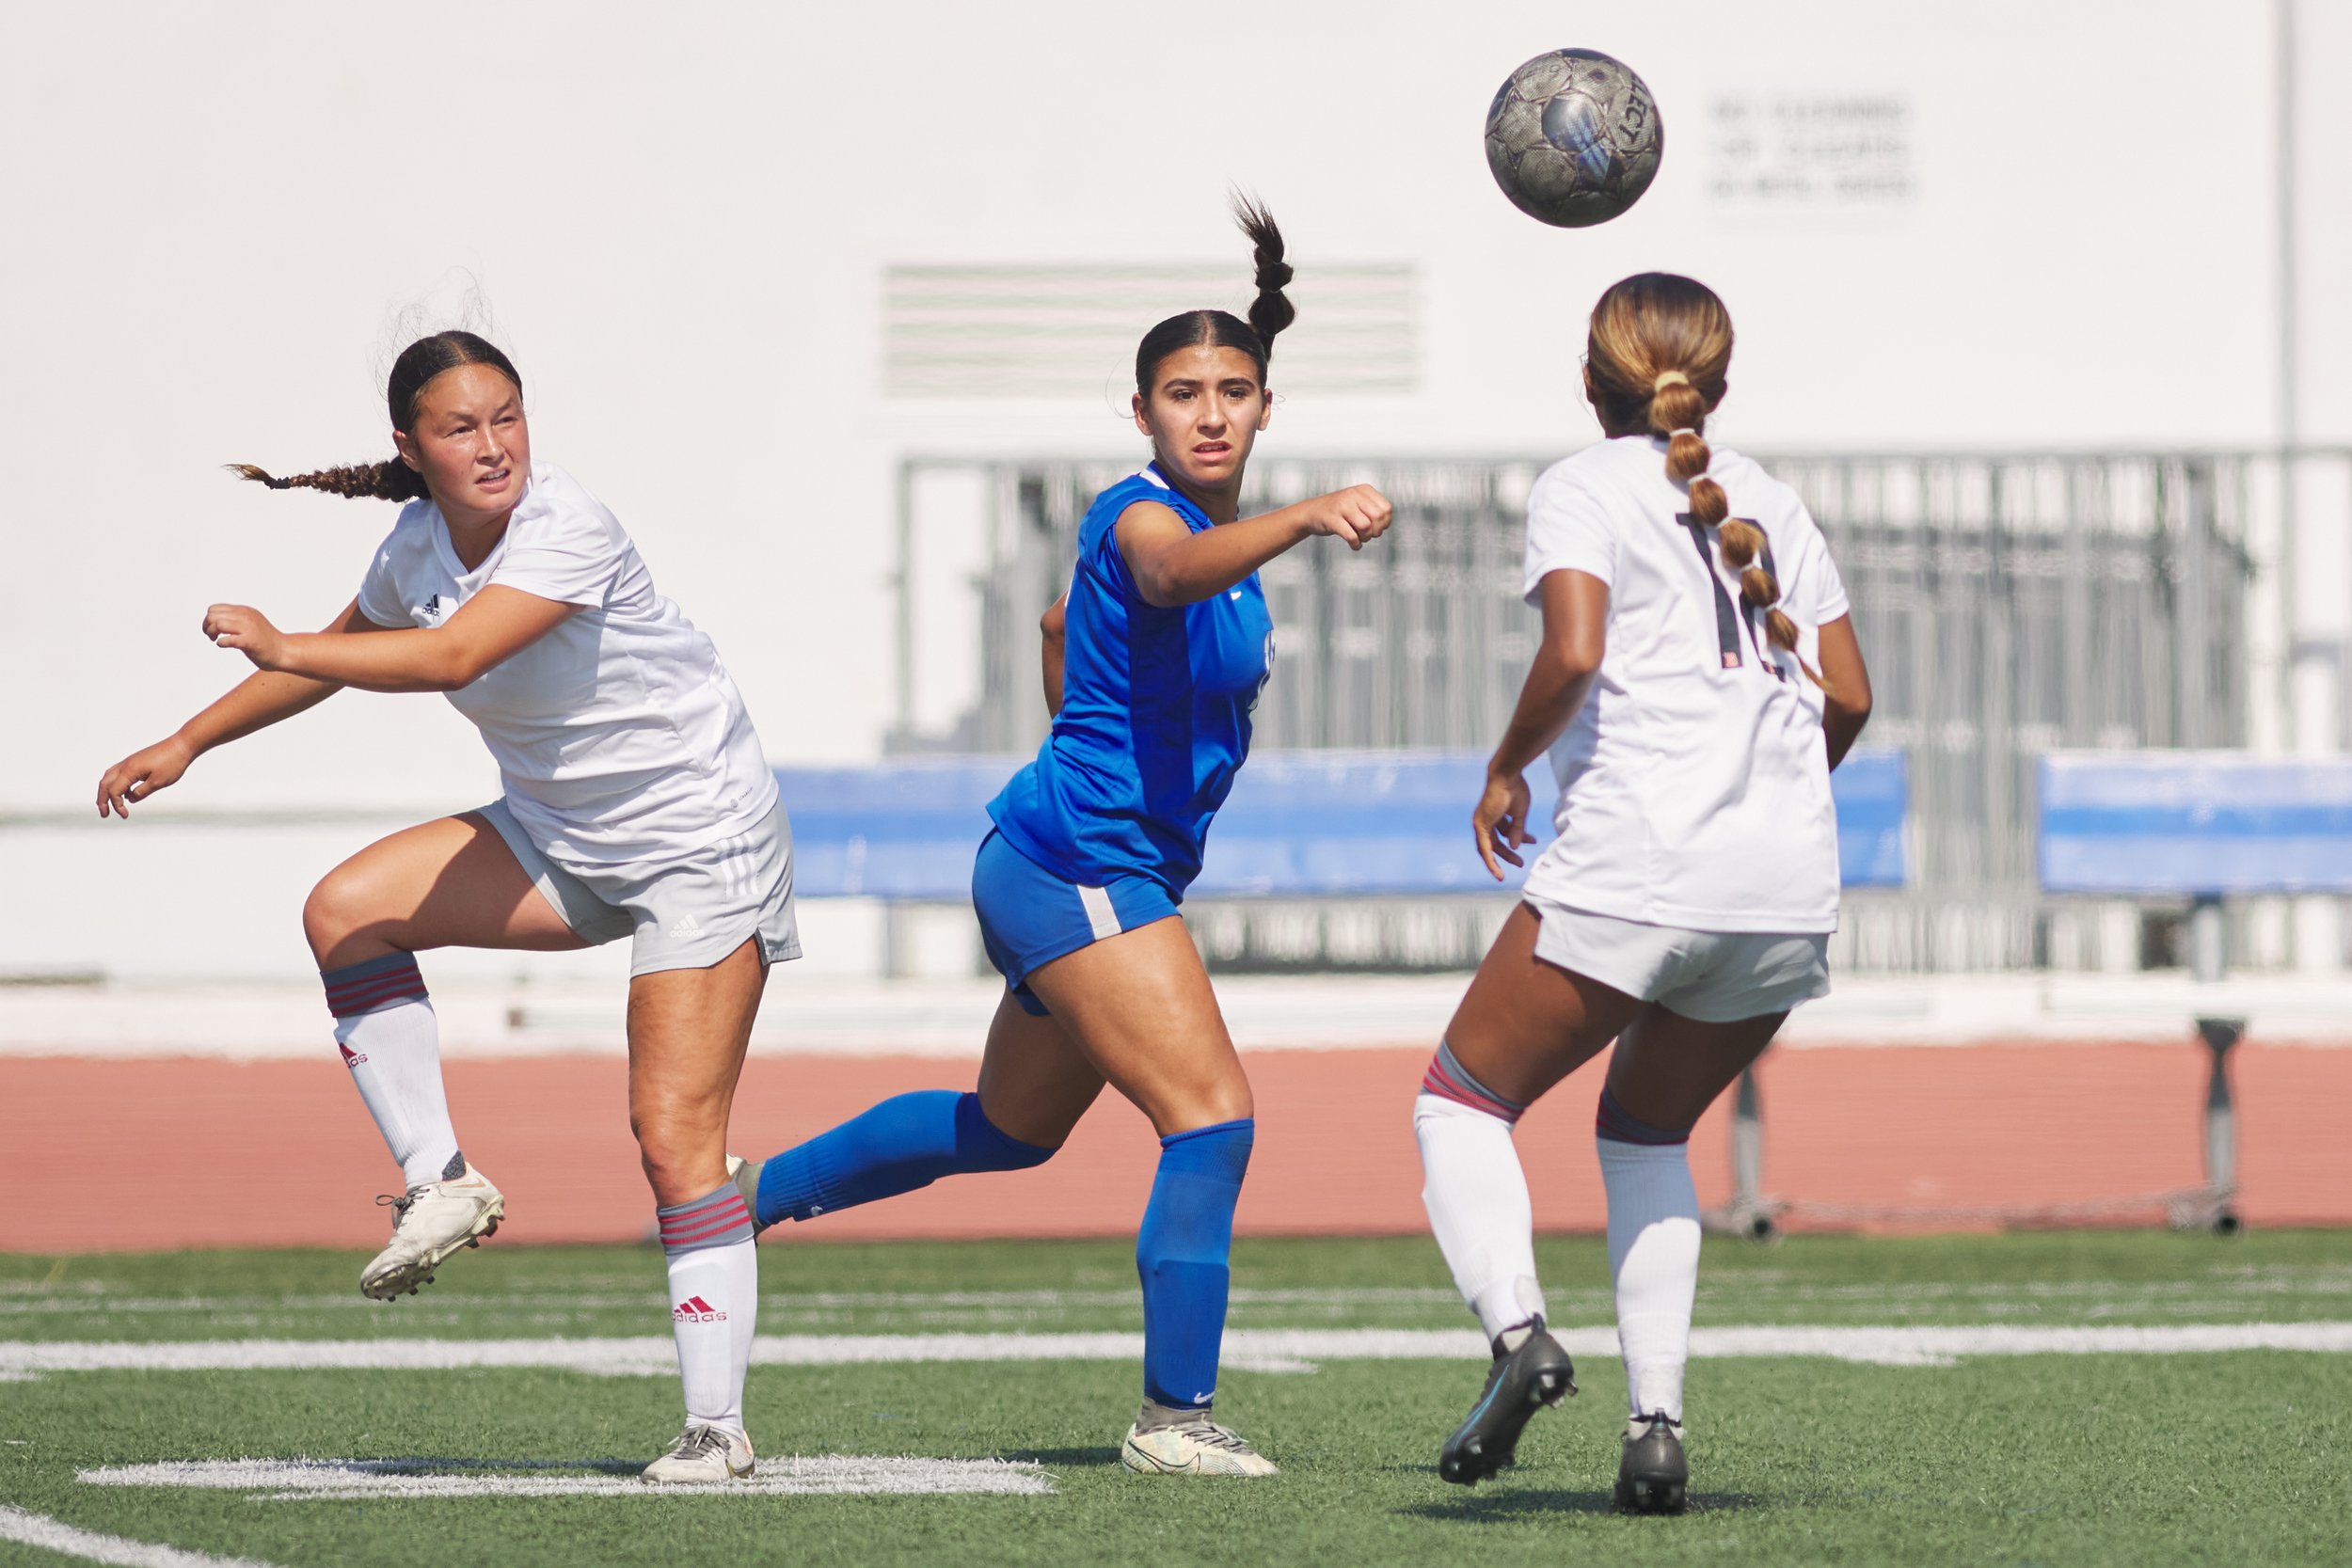  Santa Monica College Corsairs' Alinna Savaterre (center) and Long Beach College Vikings' Aimee McSparren (left) and Melanie Guerrero during the women's soccer match on Friday, Sept. 15, 2023, at Corsair Field in Santa Monica, Calif. The Corsairs tie